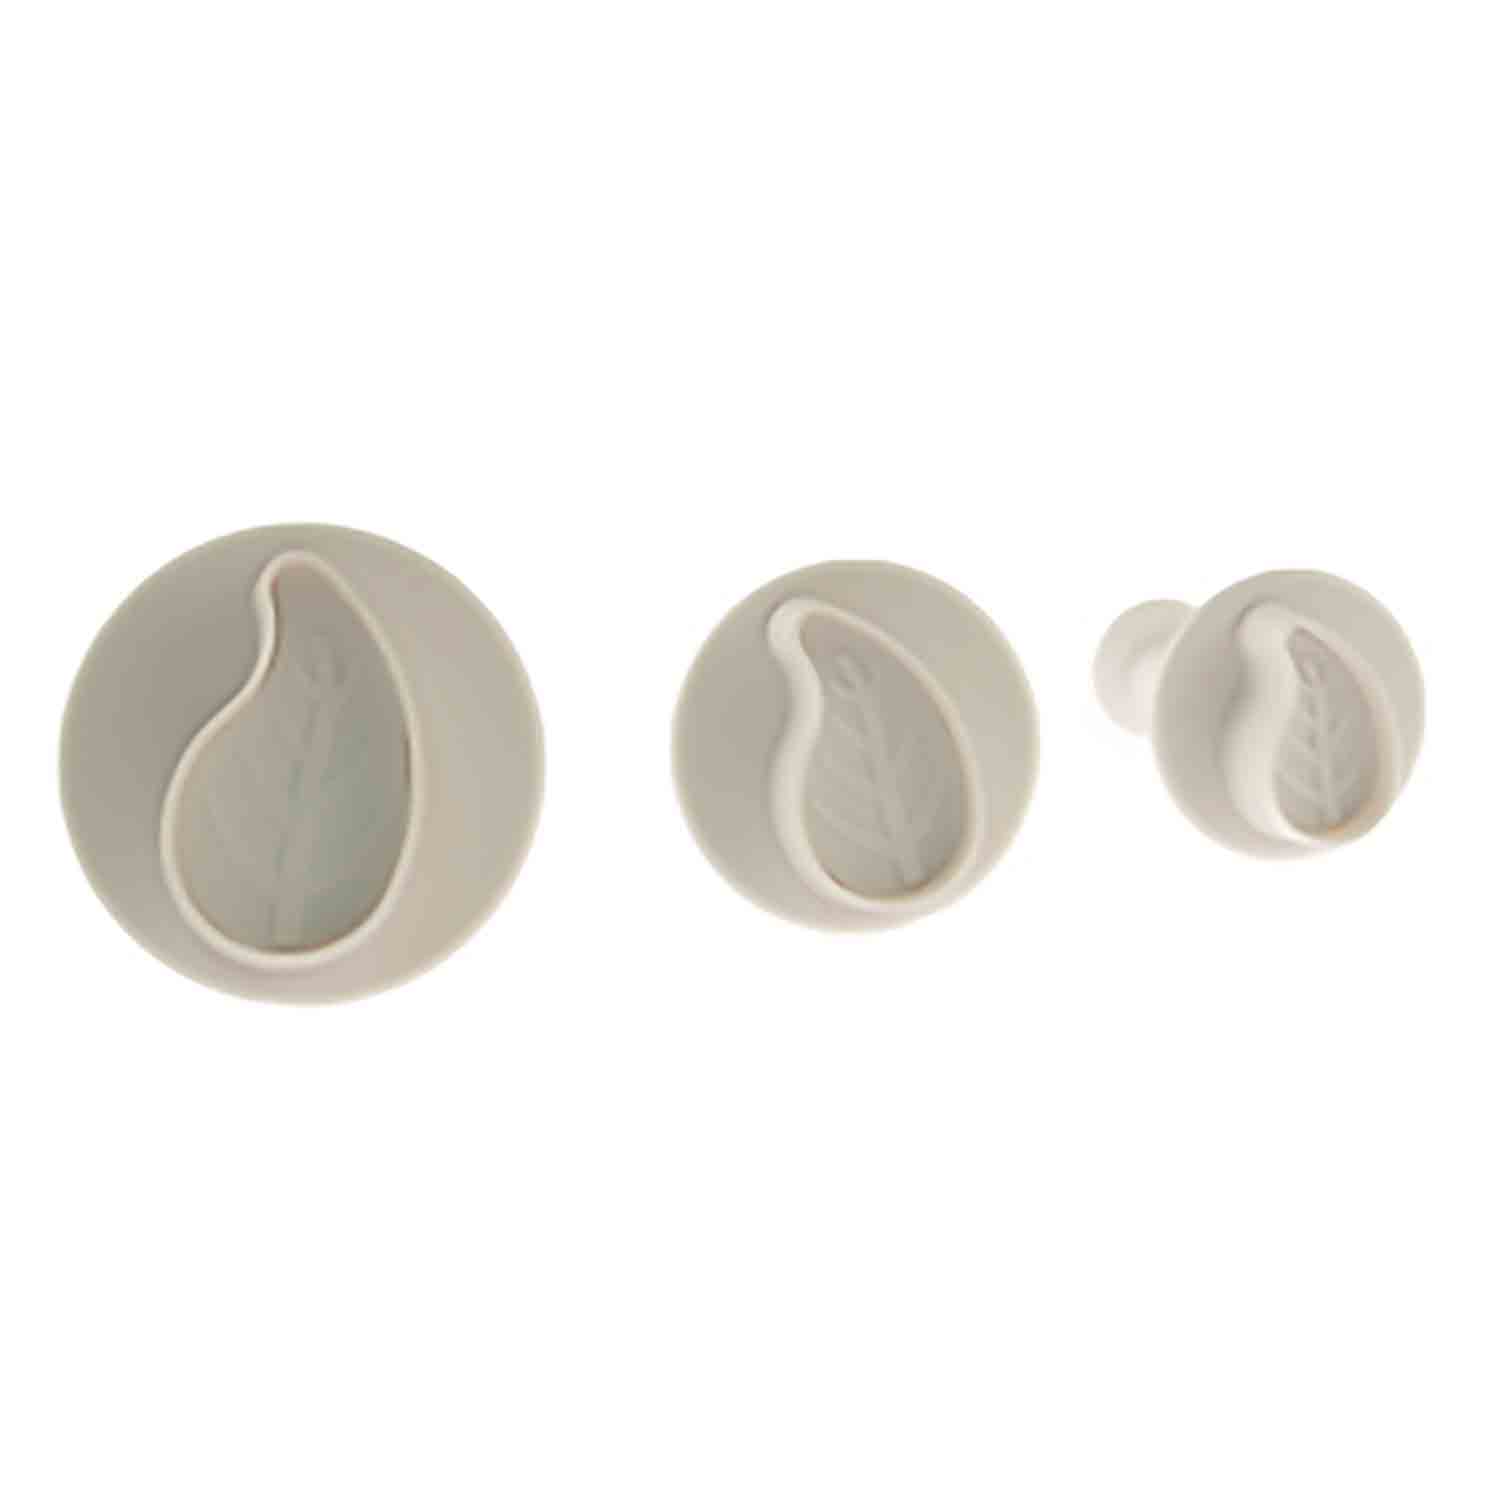 Curved Leaf 1954 Ateco Plunger Cutters Set of 3 